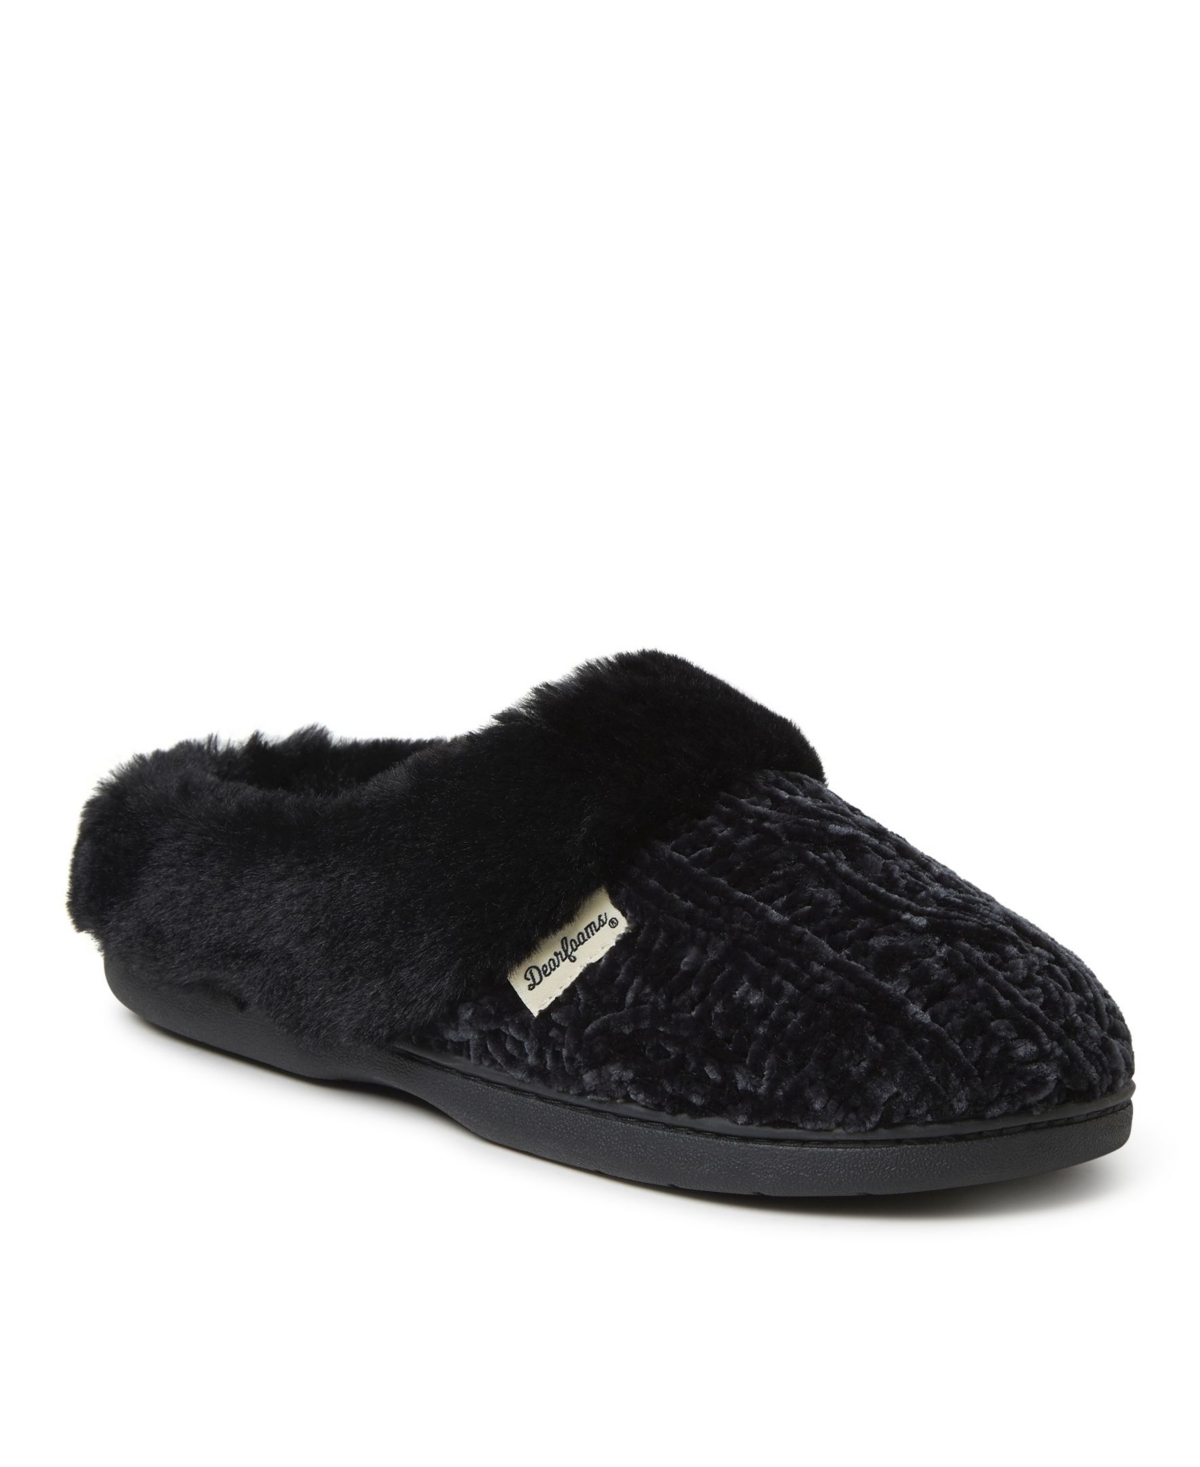 Women's Claire Marled Chenille Knit Clog - Sleet